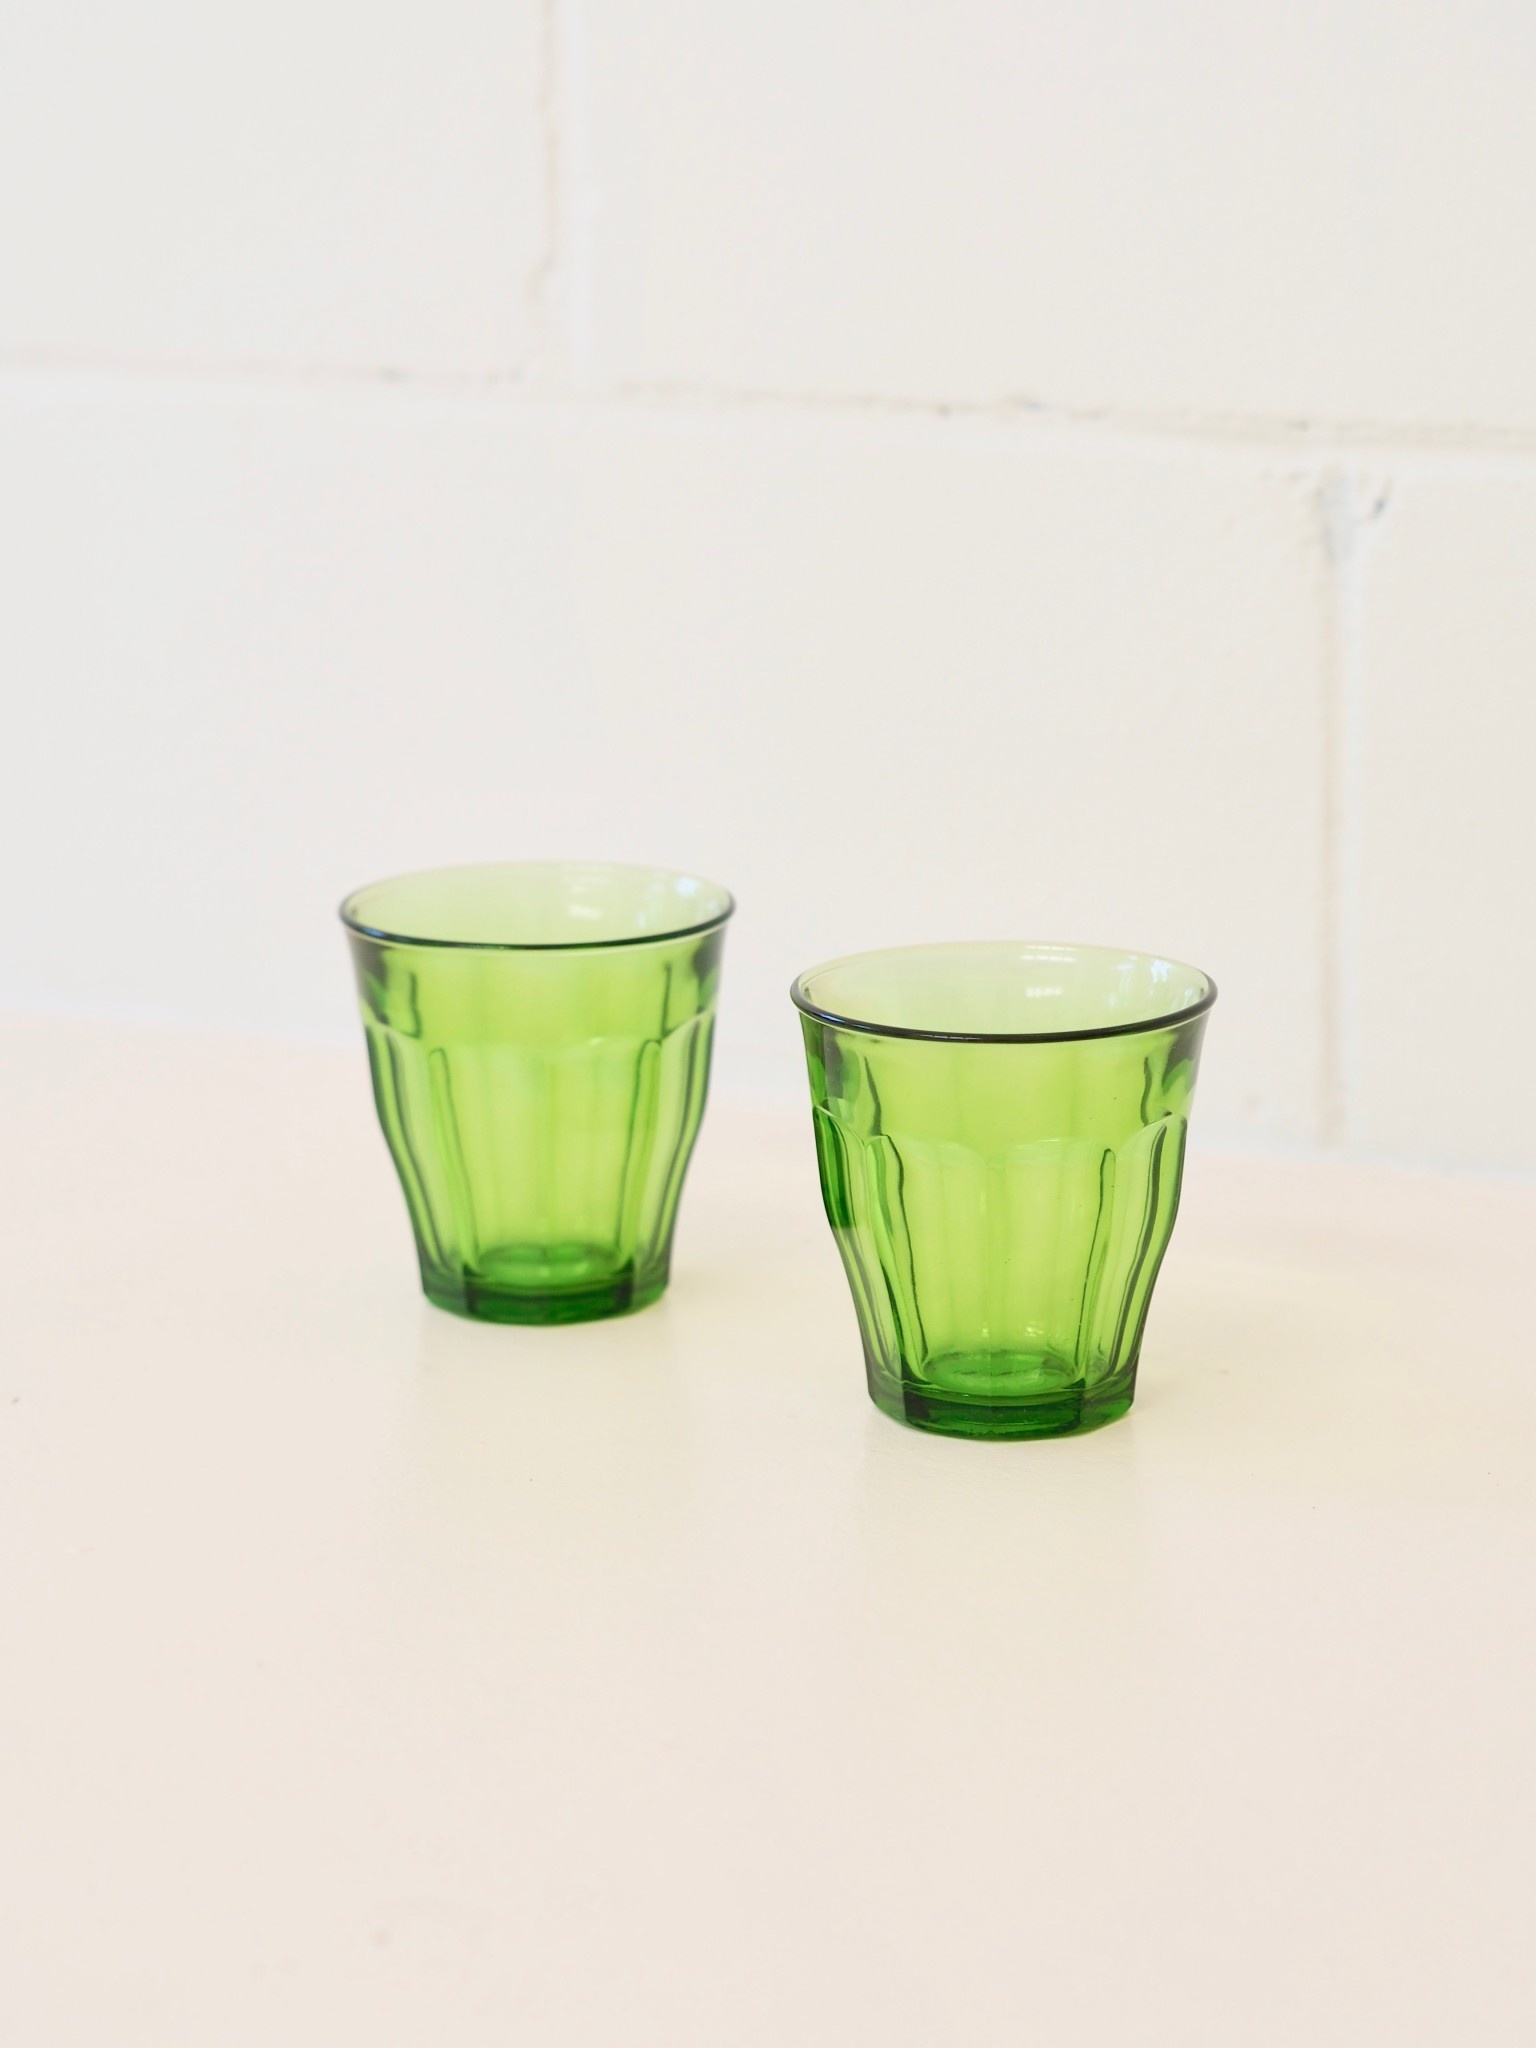 Picardie glass - Green